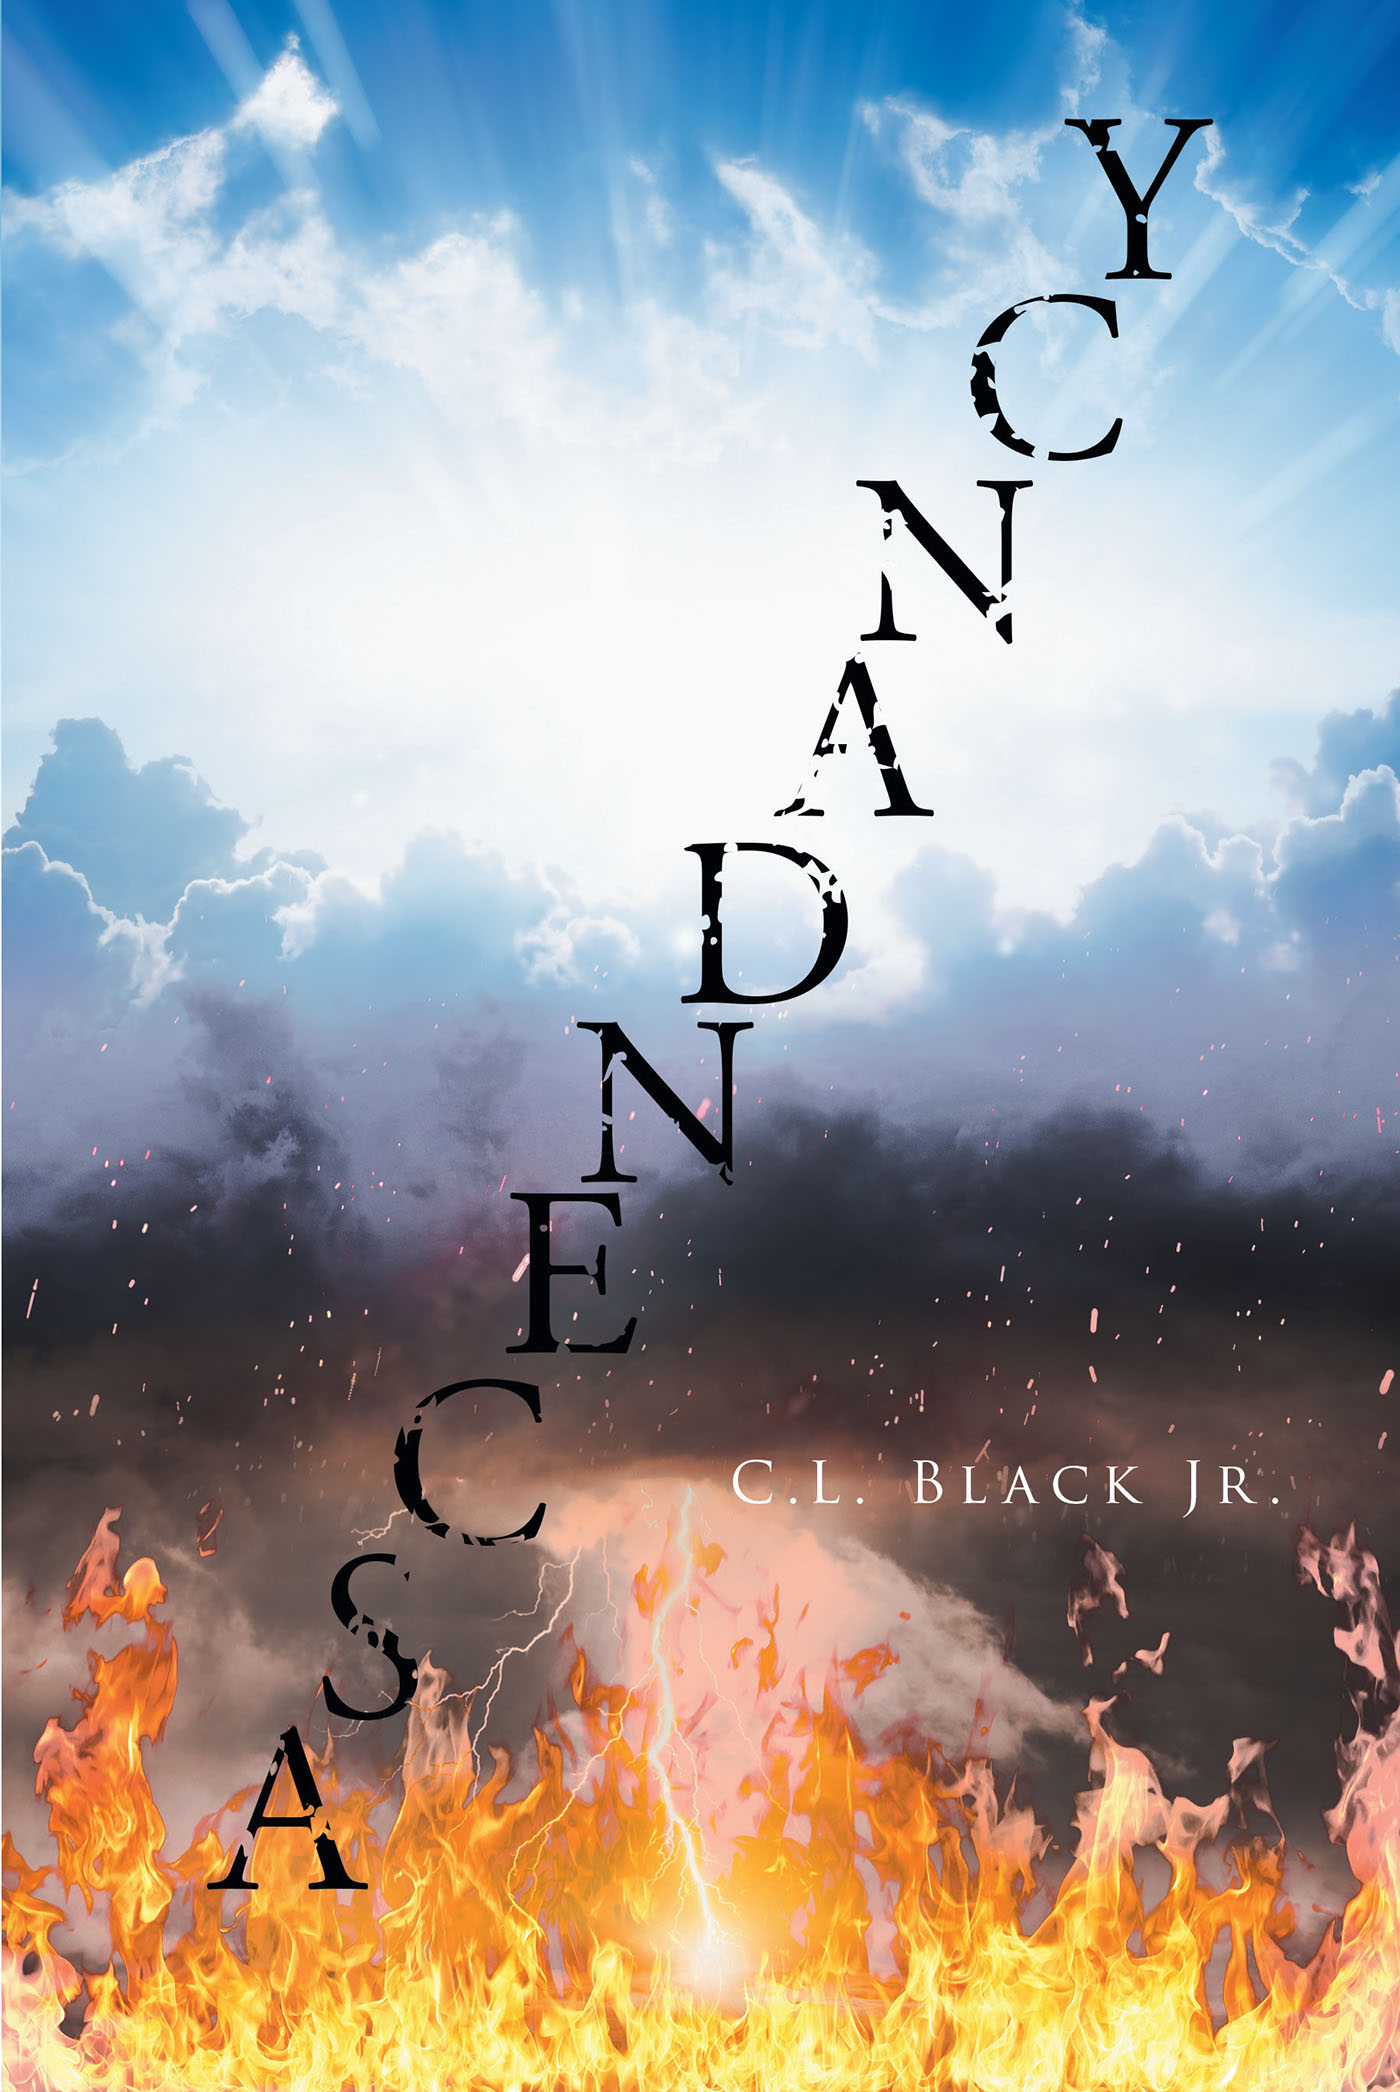 C.L. Black Jr.’s New Book, "Ascendancy," is a Fascinating and Eye-Opening Look at the Incredible Growth That Can Come About from Life’s Struggles